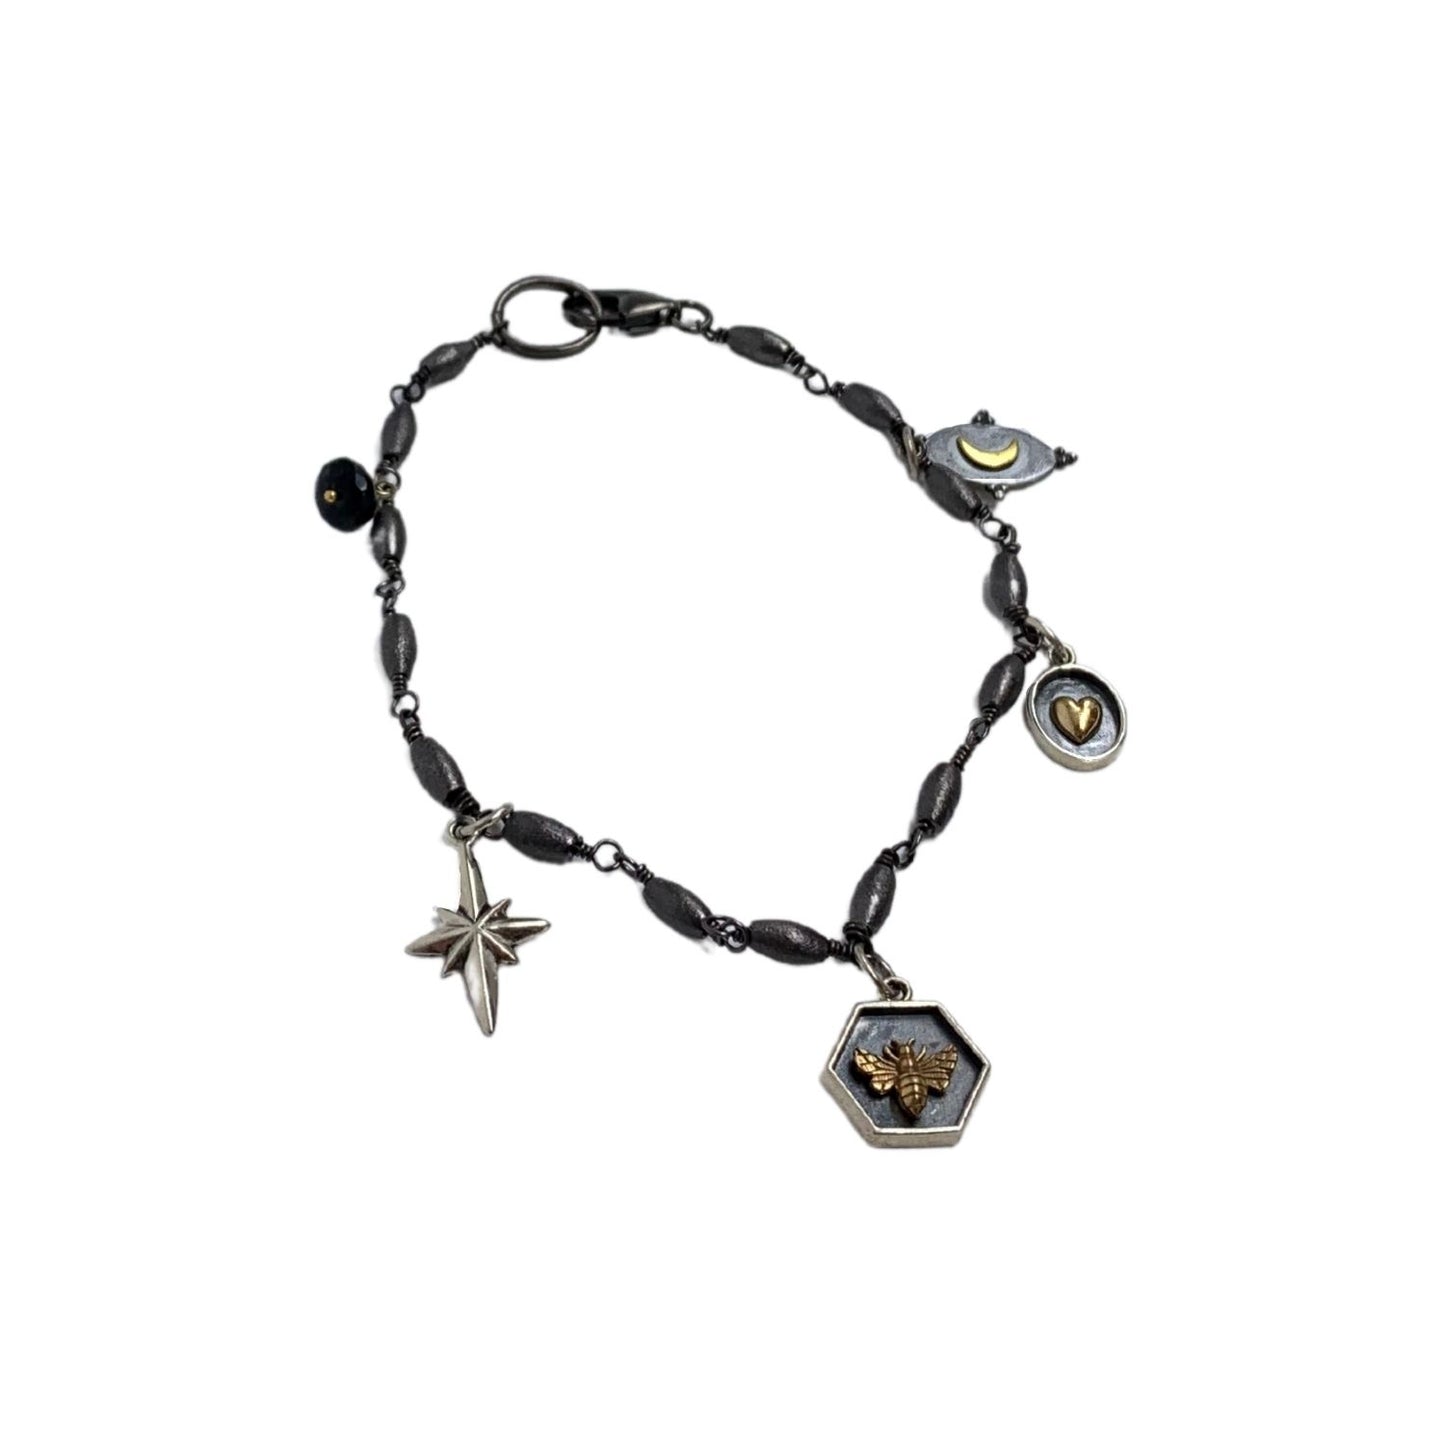 Oxidized Silver Cylinder Brushed Charm Bracelet with North Star and Moon